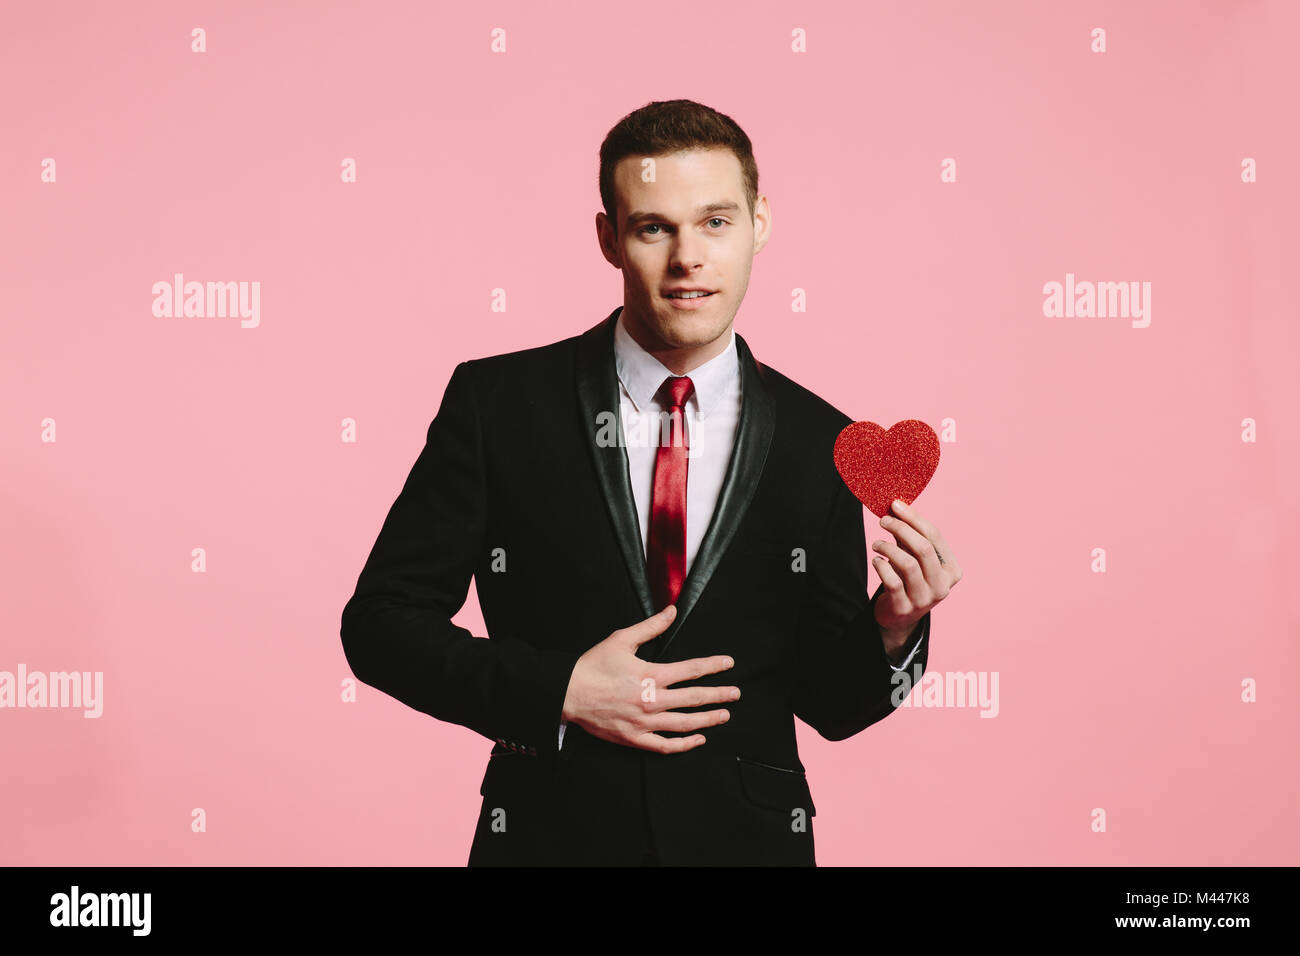 Handsome guy in a black suit and red tie offering a red heart on pink background Stock Photo